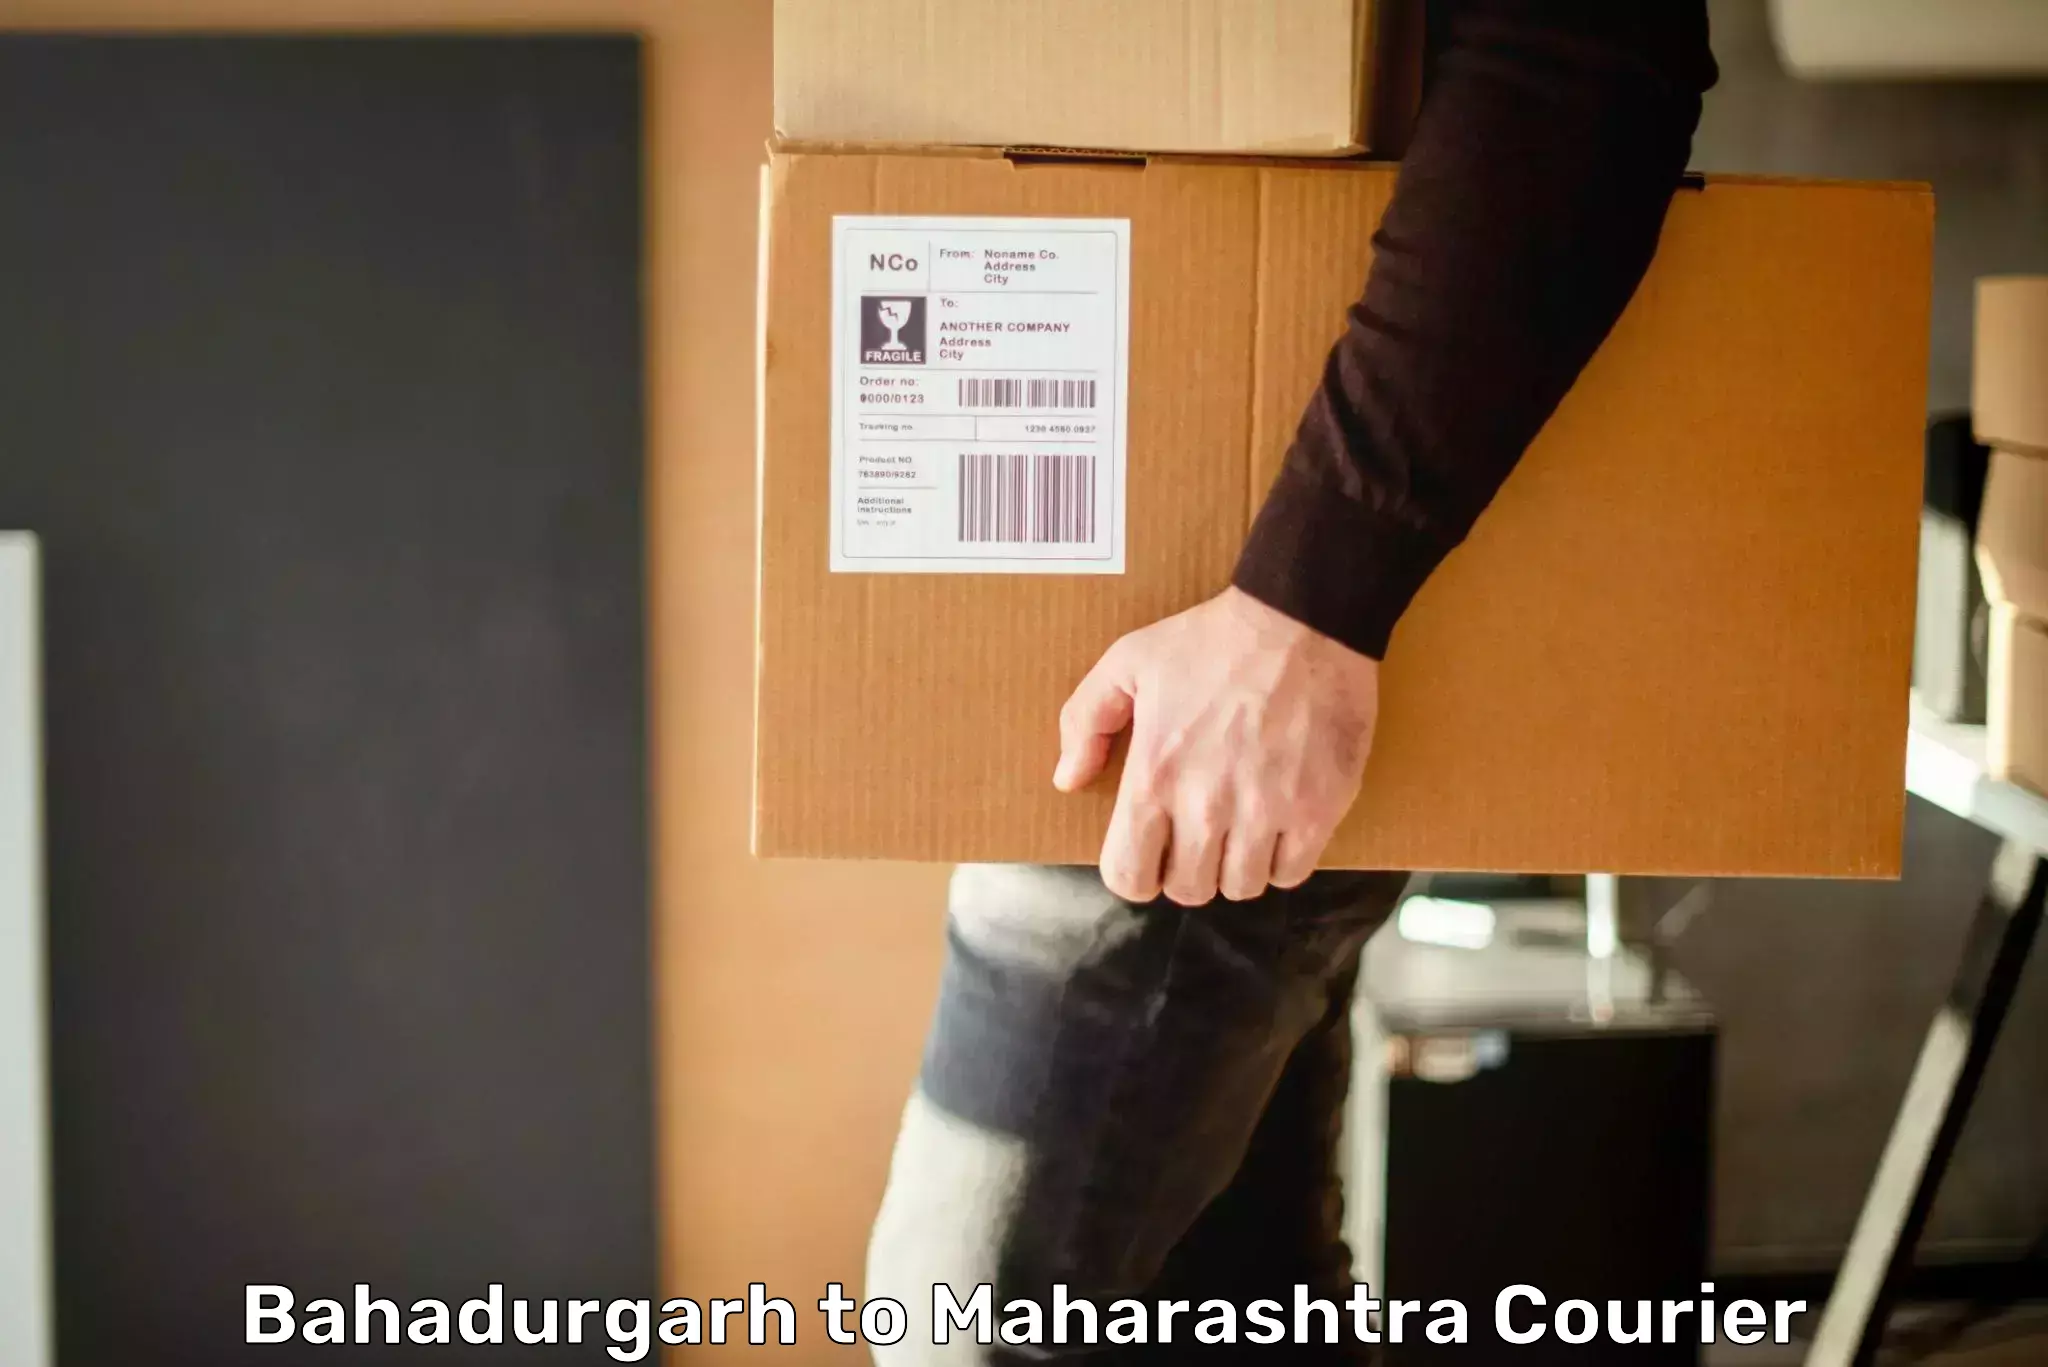 Package delivery network Bahadurgarh to Nashik